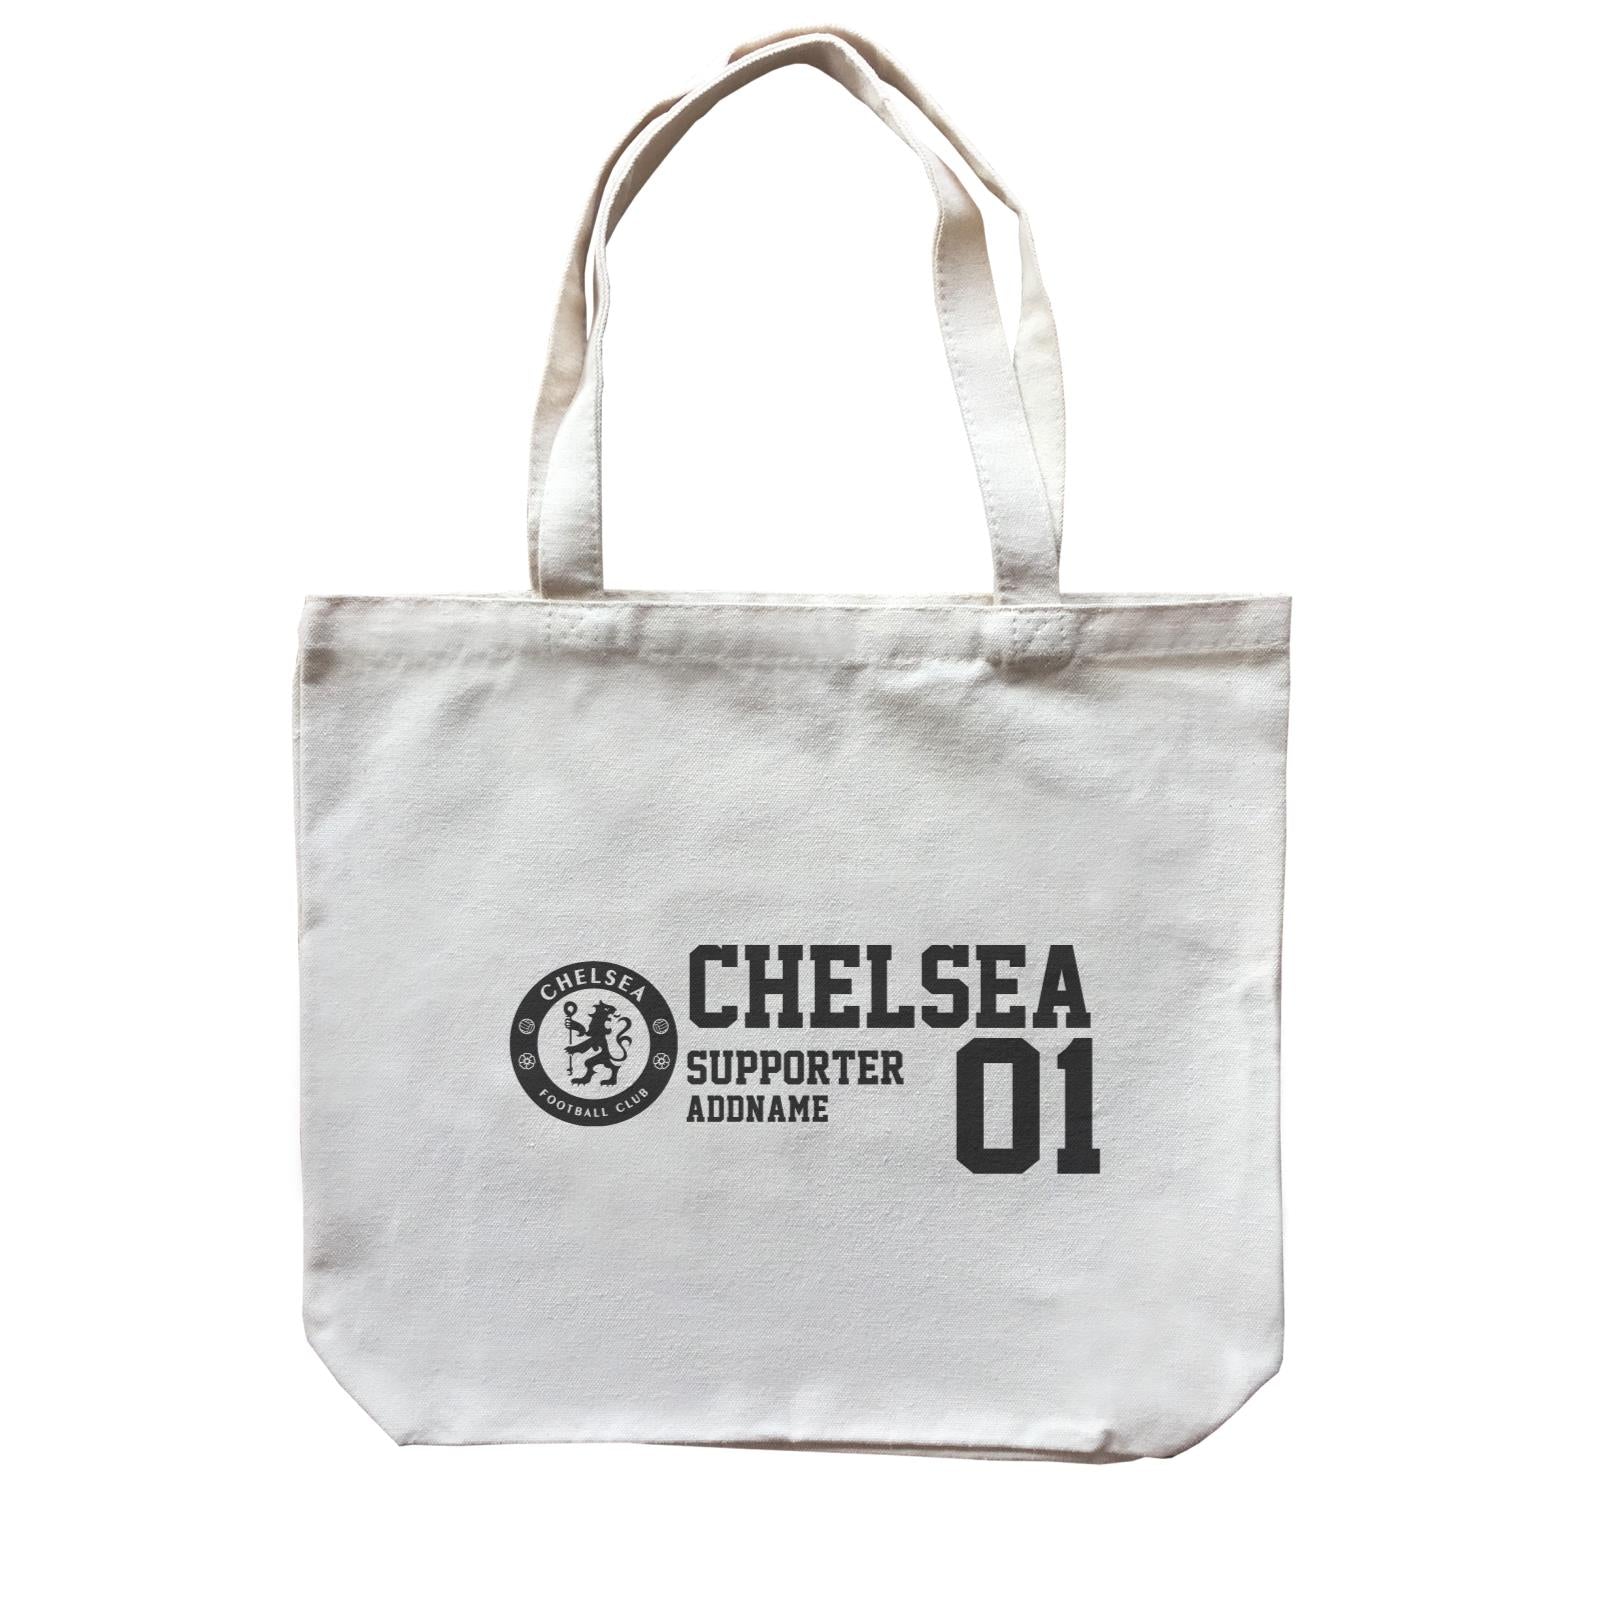 Chelsea Football Supporter Accessories Addname Canvas Bag